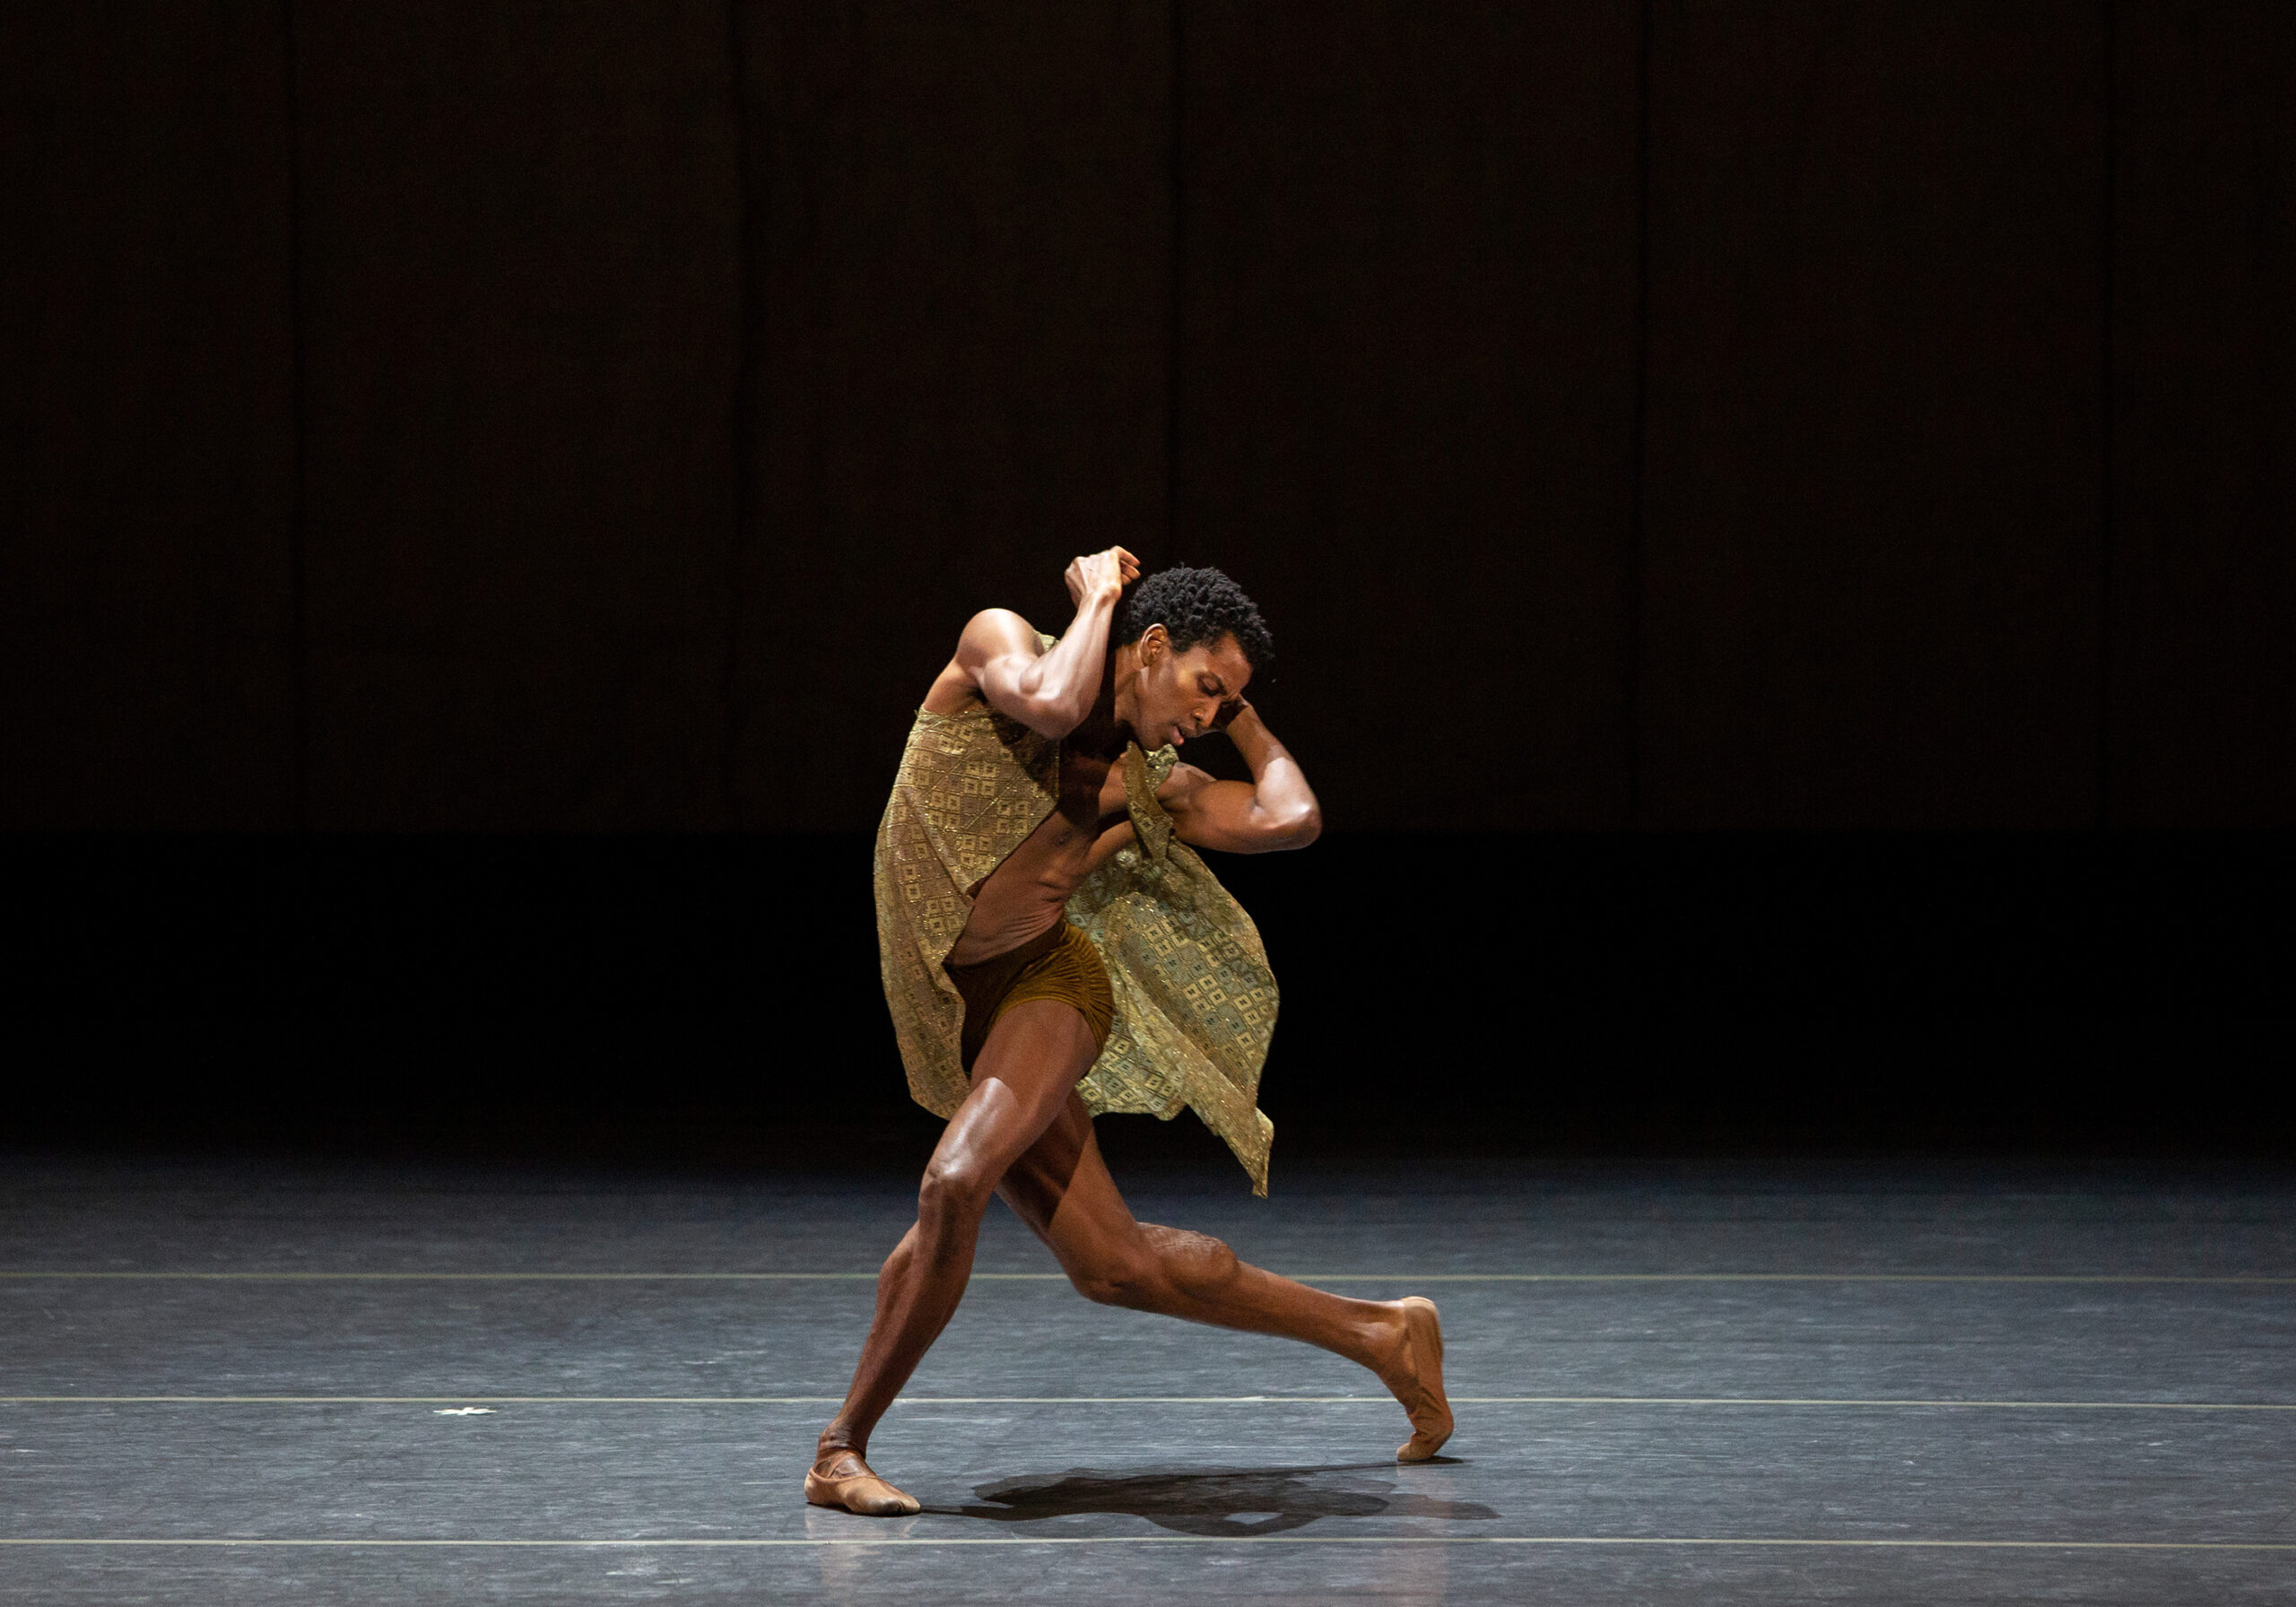 ABT dancer Calvin Royal III performing on stage in Alonzo King's "Single Eye"